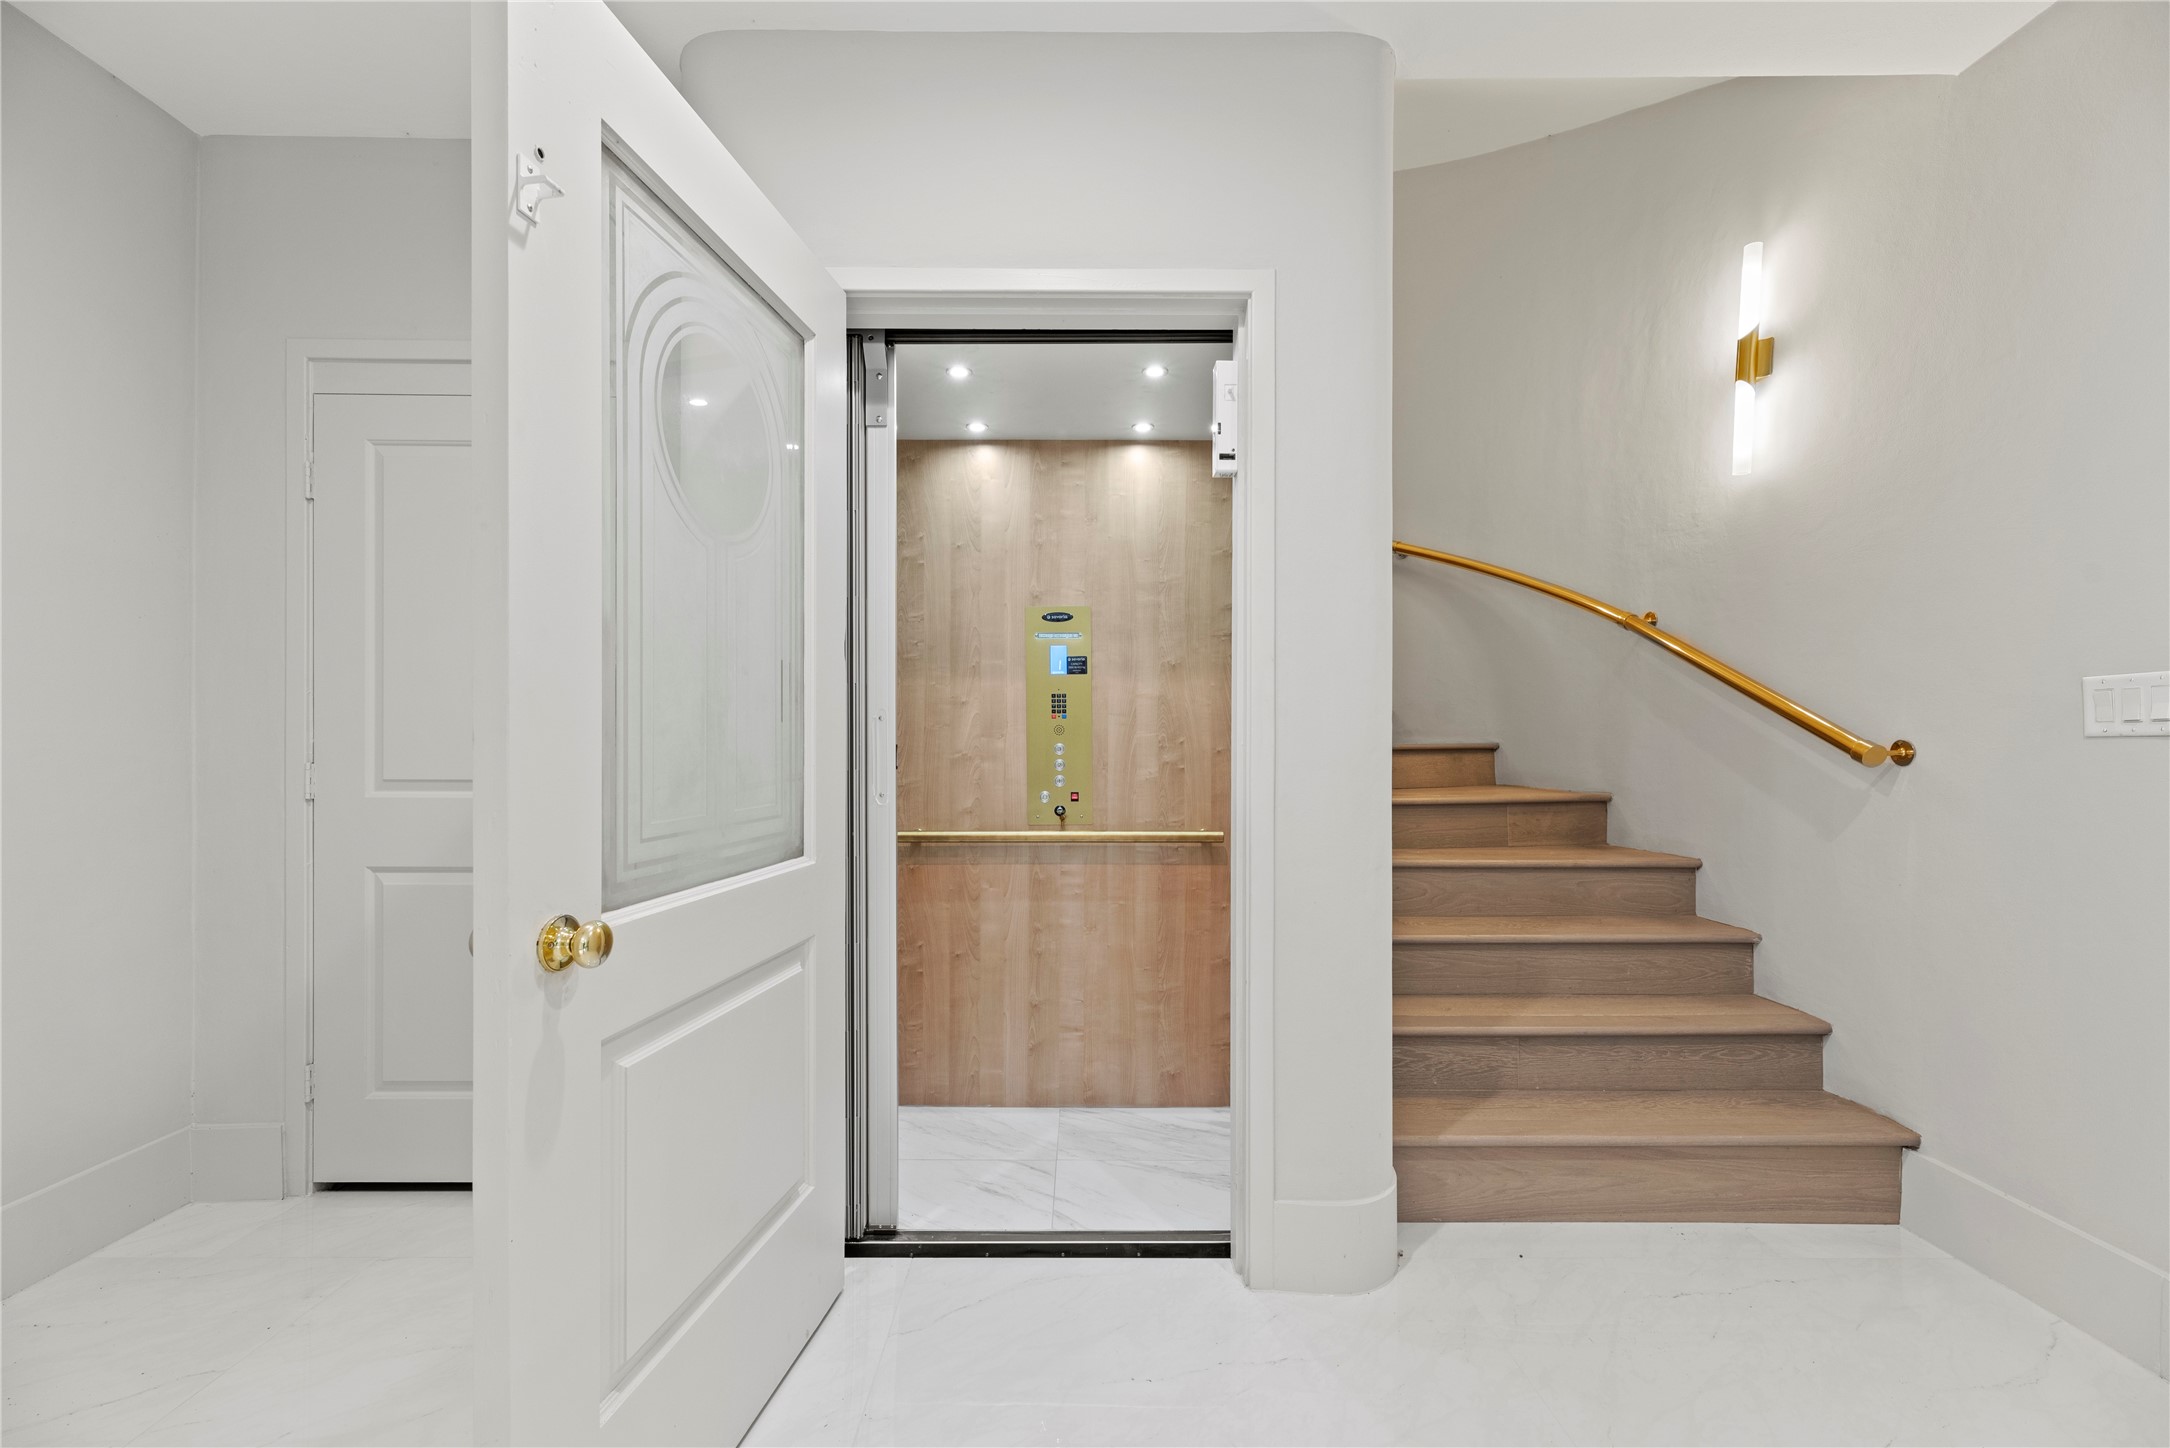 This close up of the 2021 elevator goes to all three floors- use it for groceries, holiday decorations, entertaining, health challenges & more! Note the brass railing on the stairs.